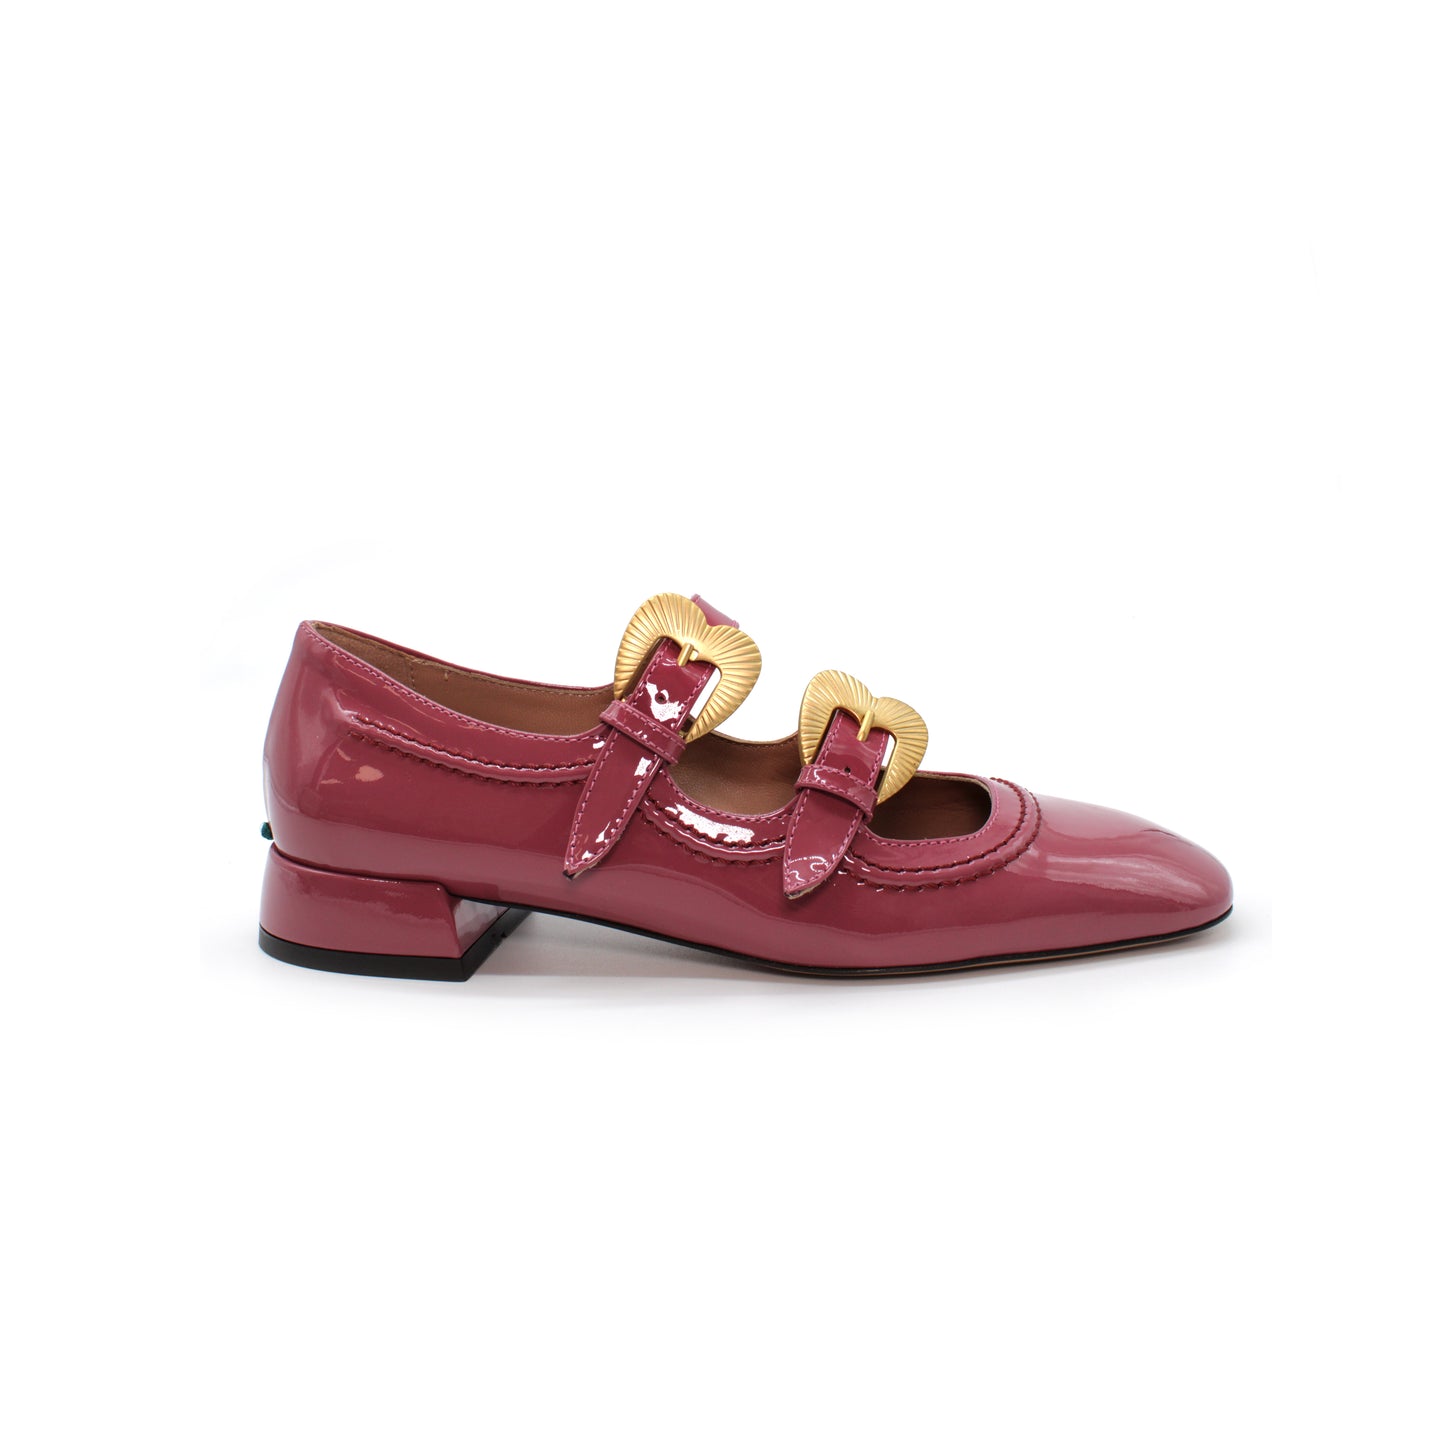 Double strap in hibiscus-coloured patent leather - Second life